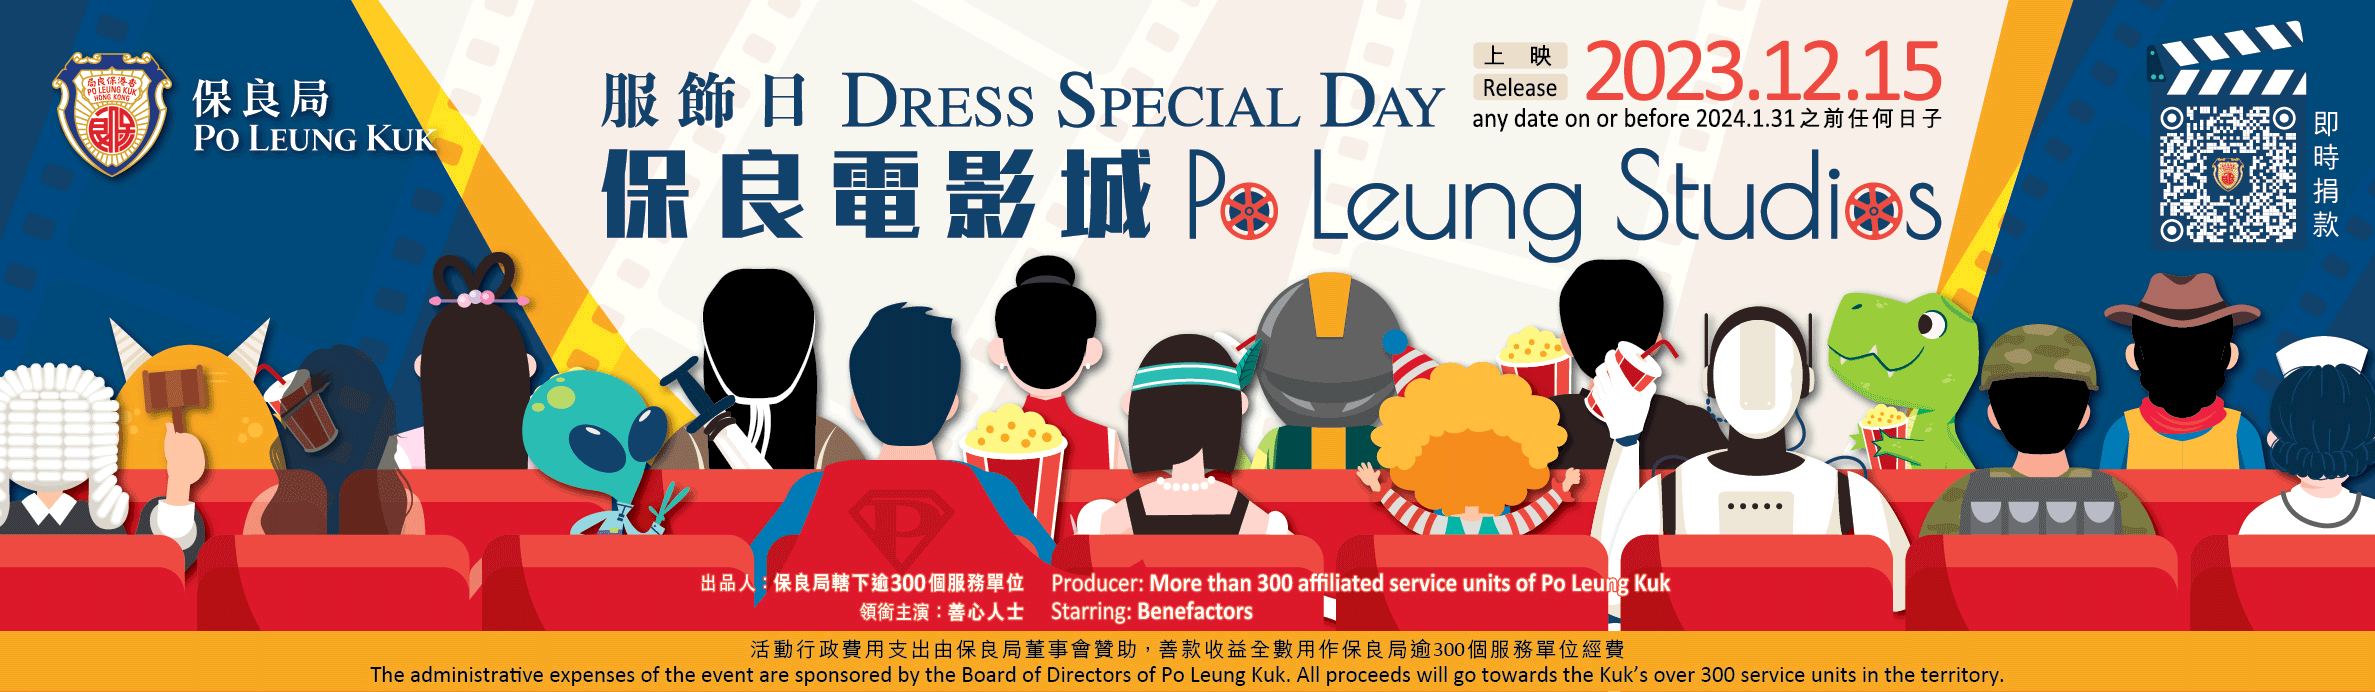 Dress Special Day 23/24